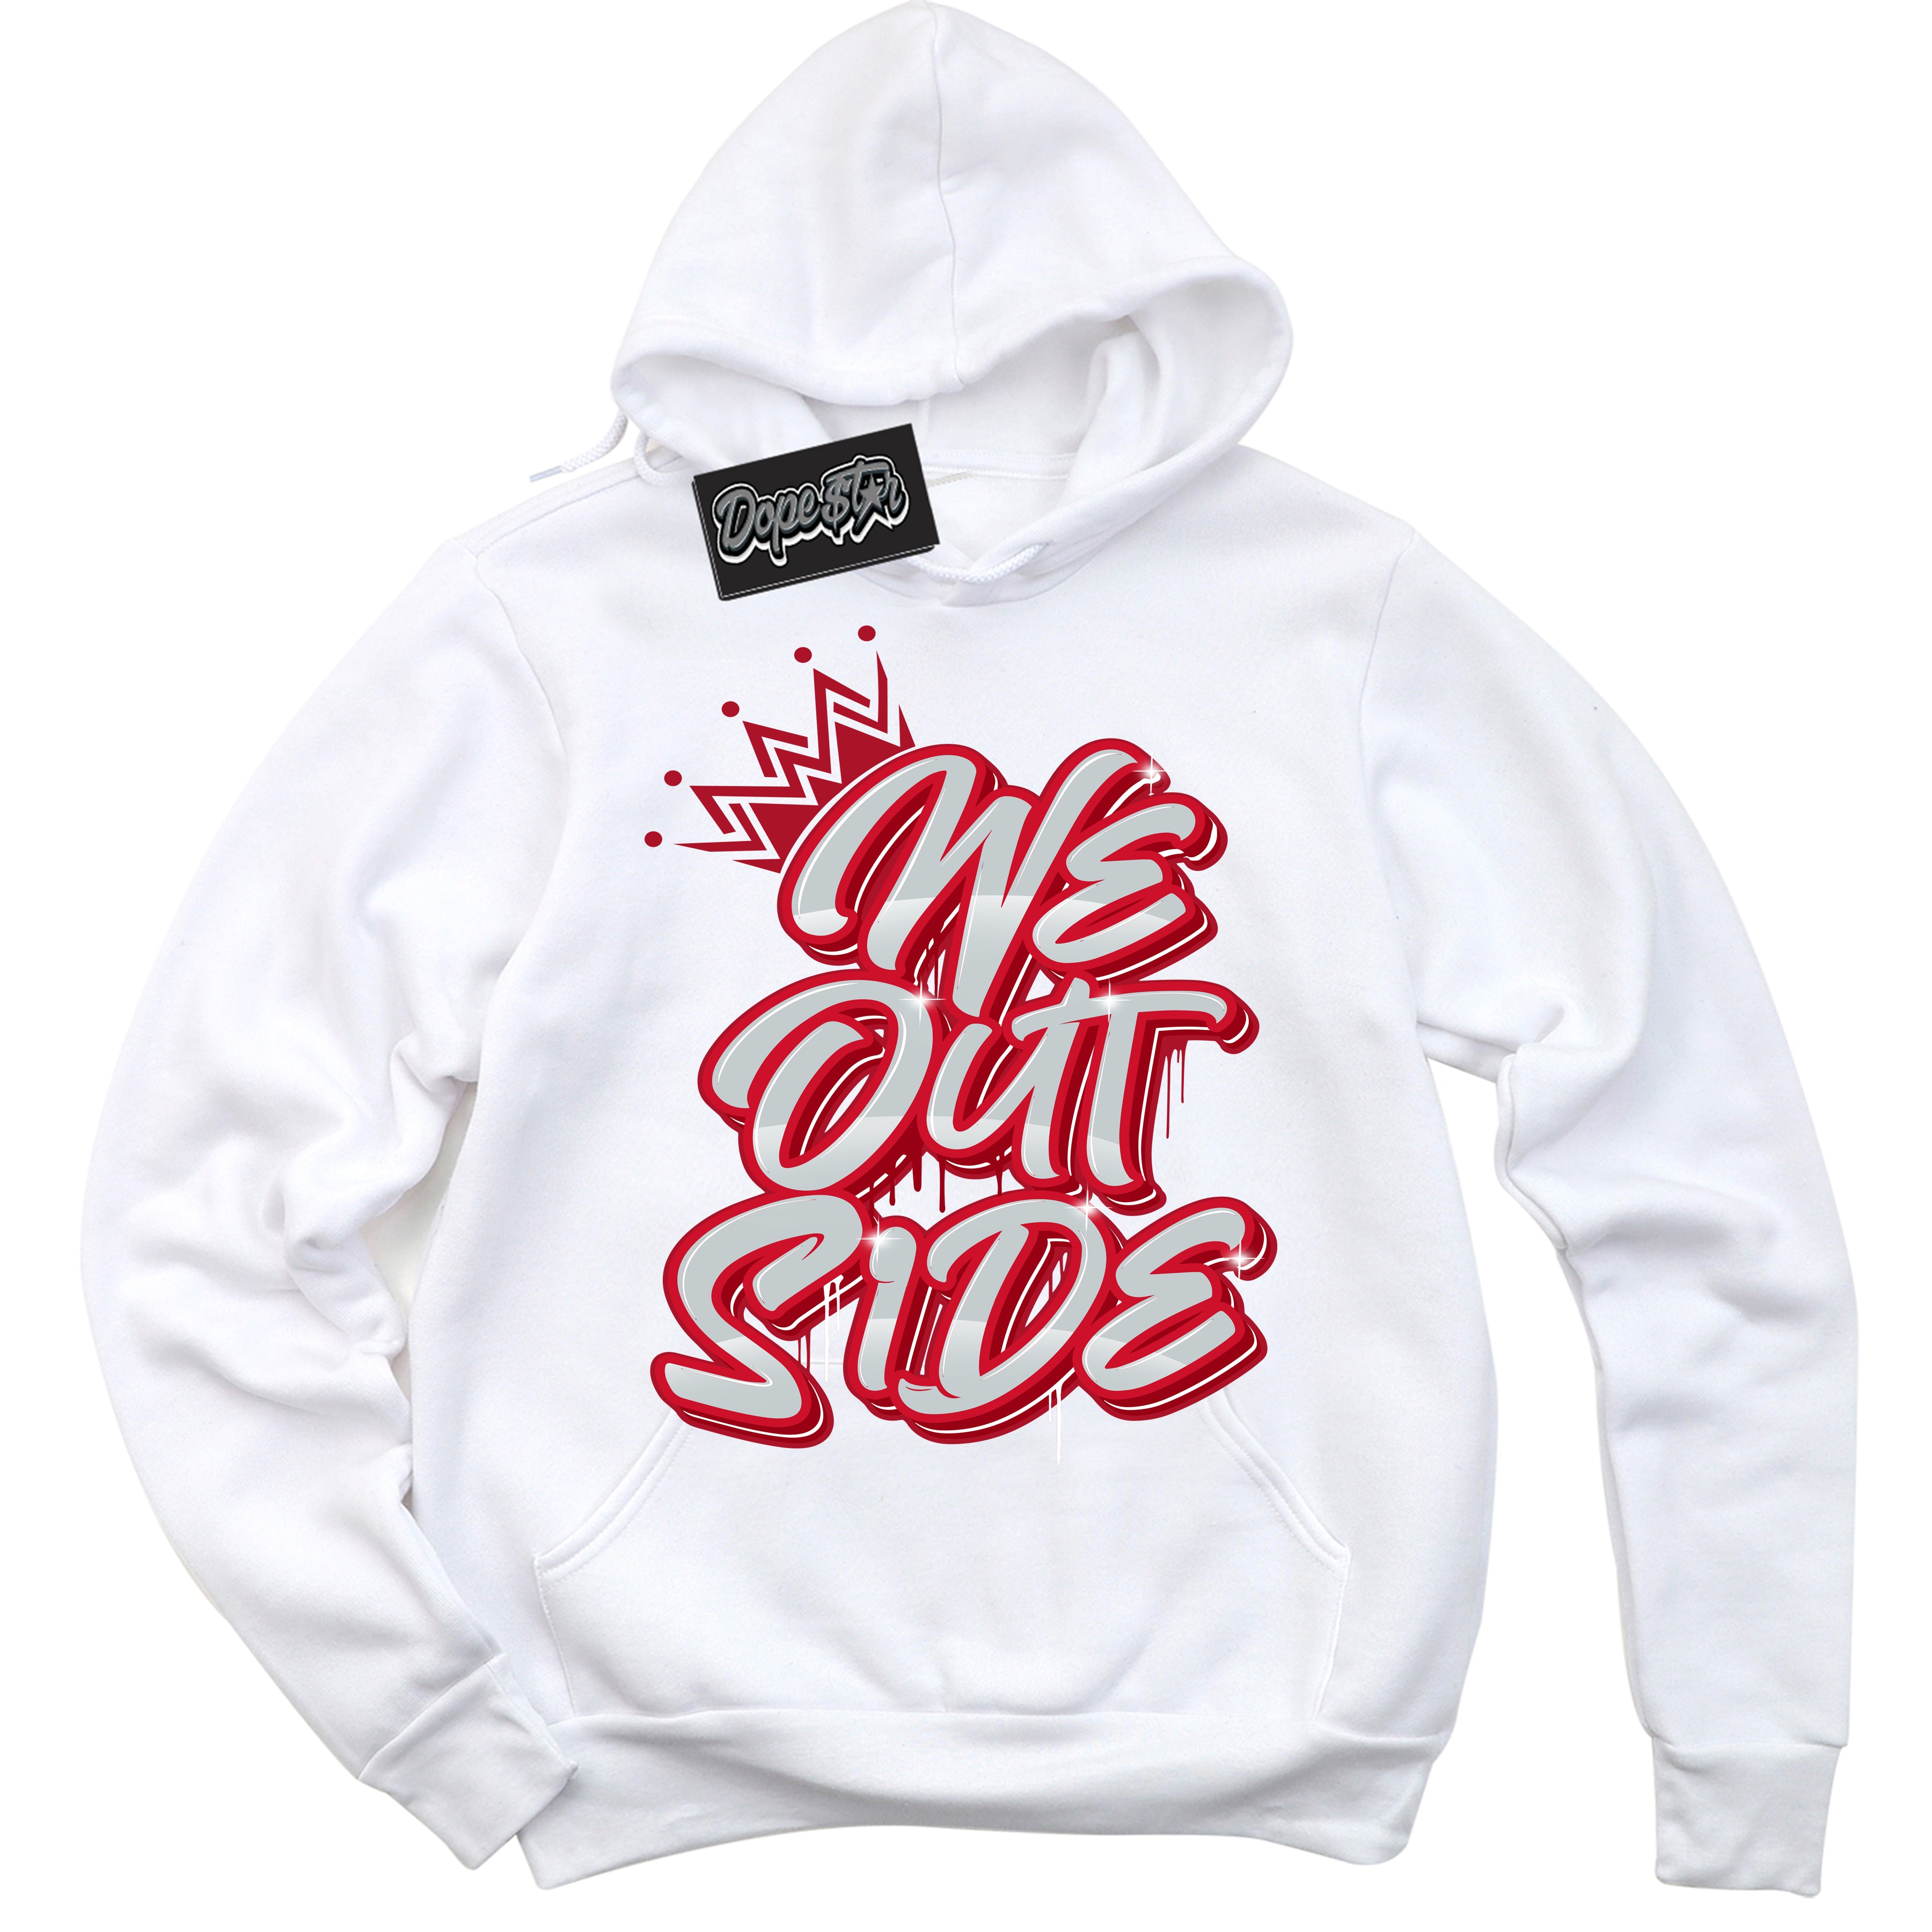 Cool White Hoodie with “ We Outside ”  design that Perfectly Matches  Reverse Ultraman Sneakers.